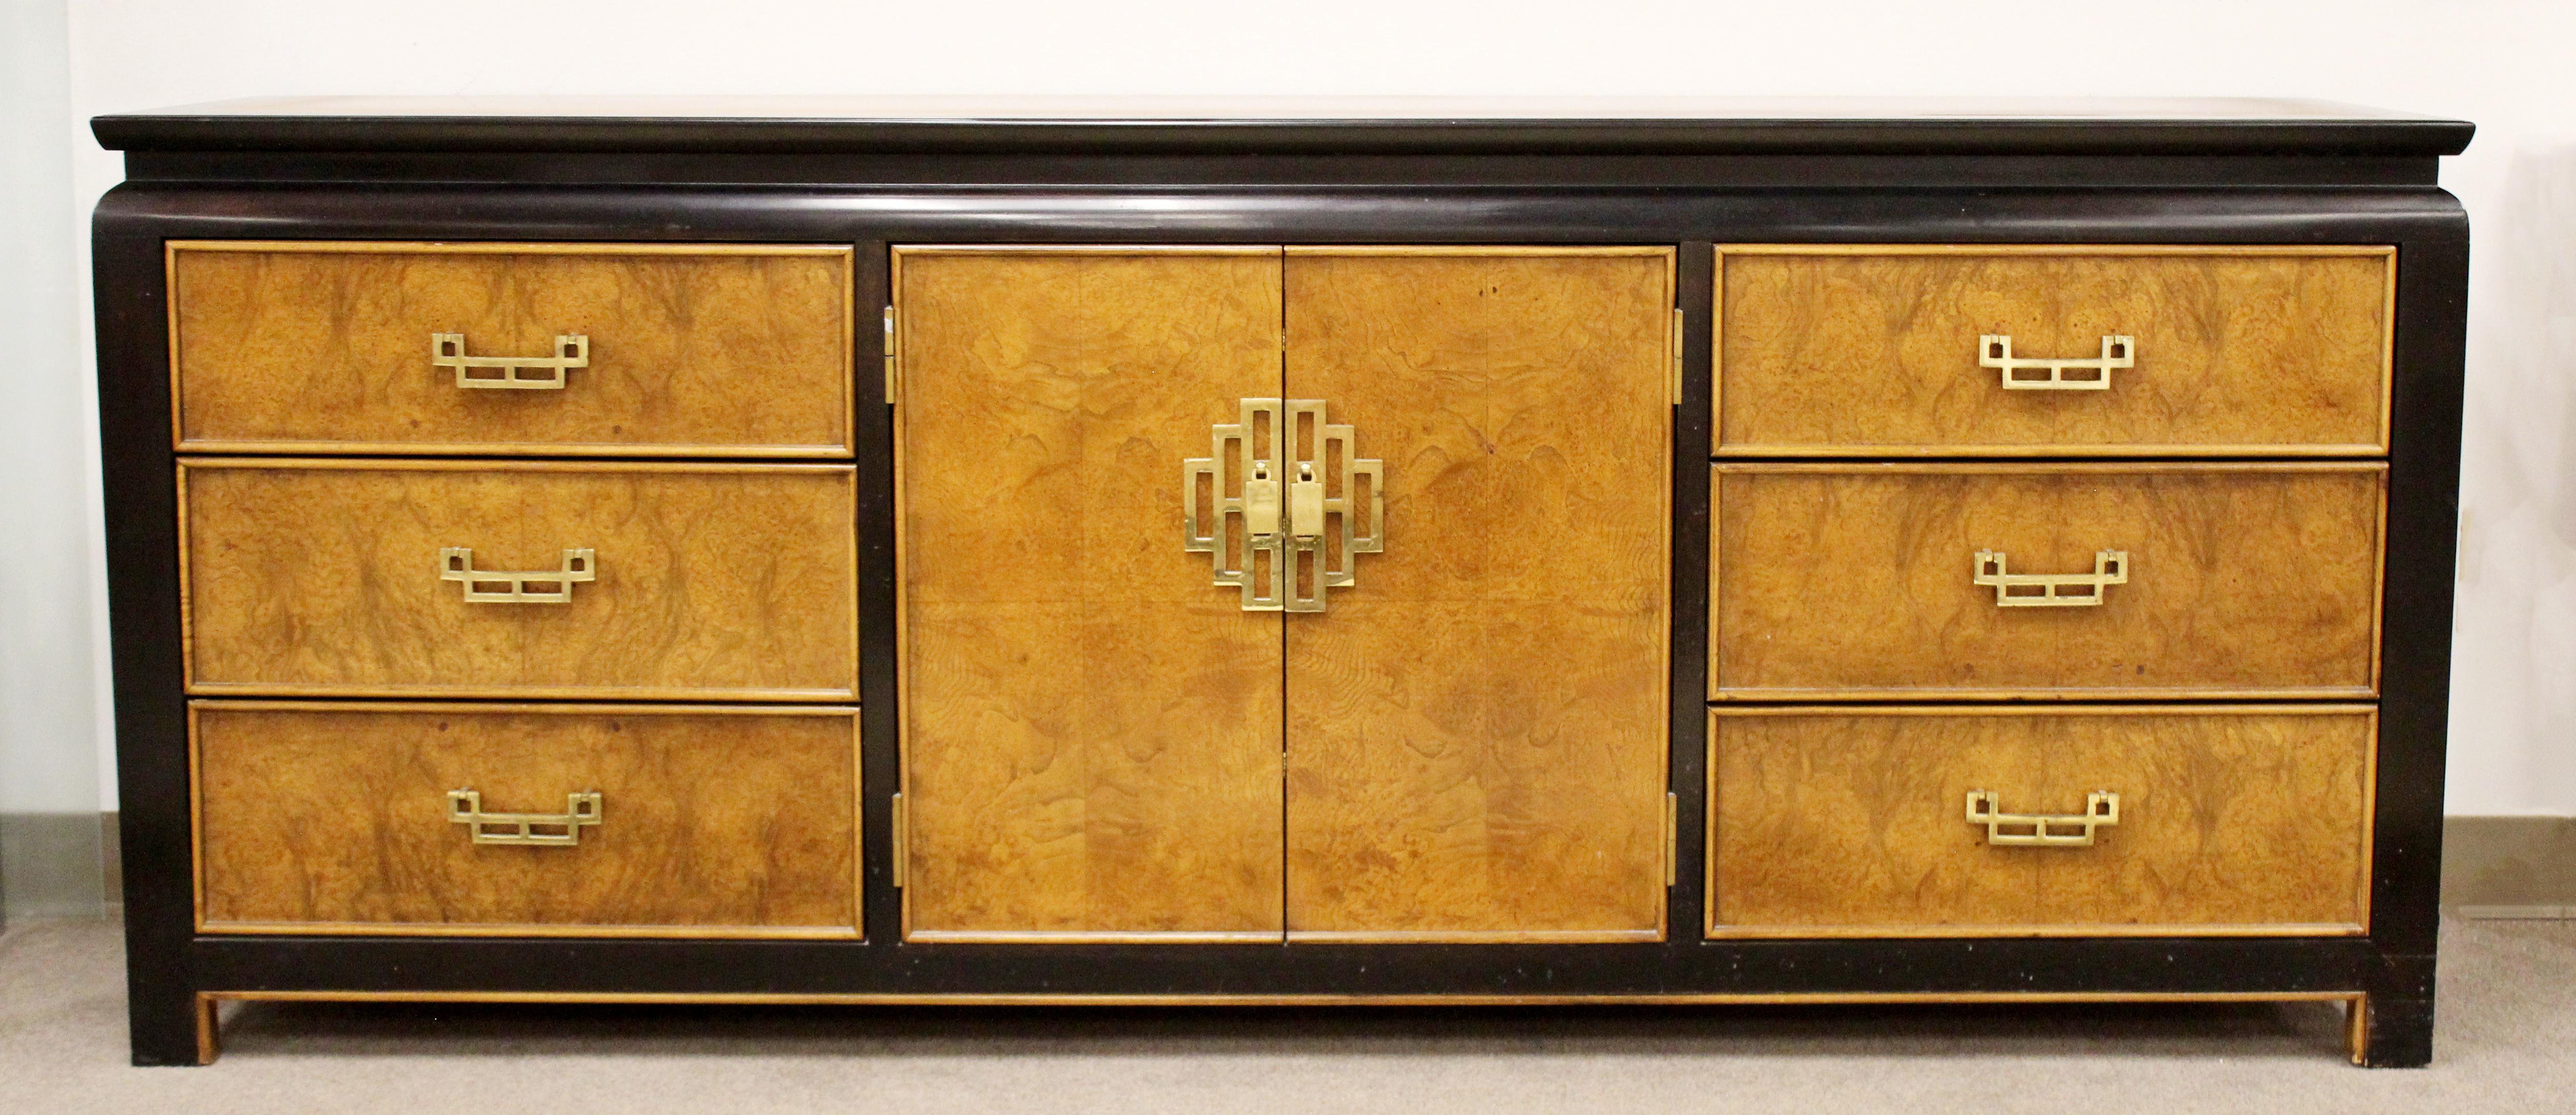 For your consideration is an incredible, Chin Hua oriental style dresser credenza sideboard, made of burl wood and brass, and matching pair of wall mirrors, by Century Furniture, circa 1970s. In excellent vintage condition. The dimensions of the